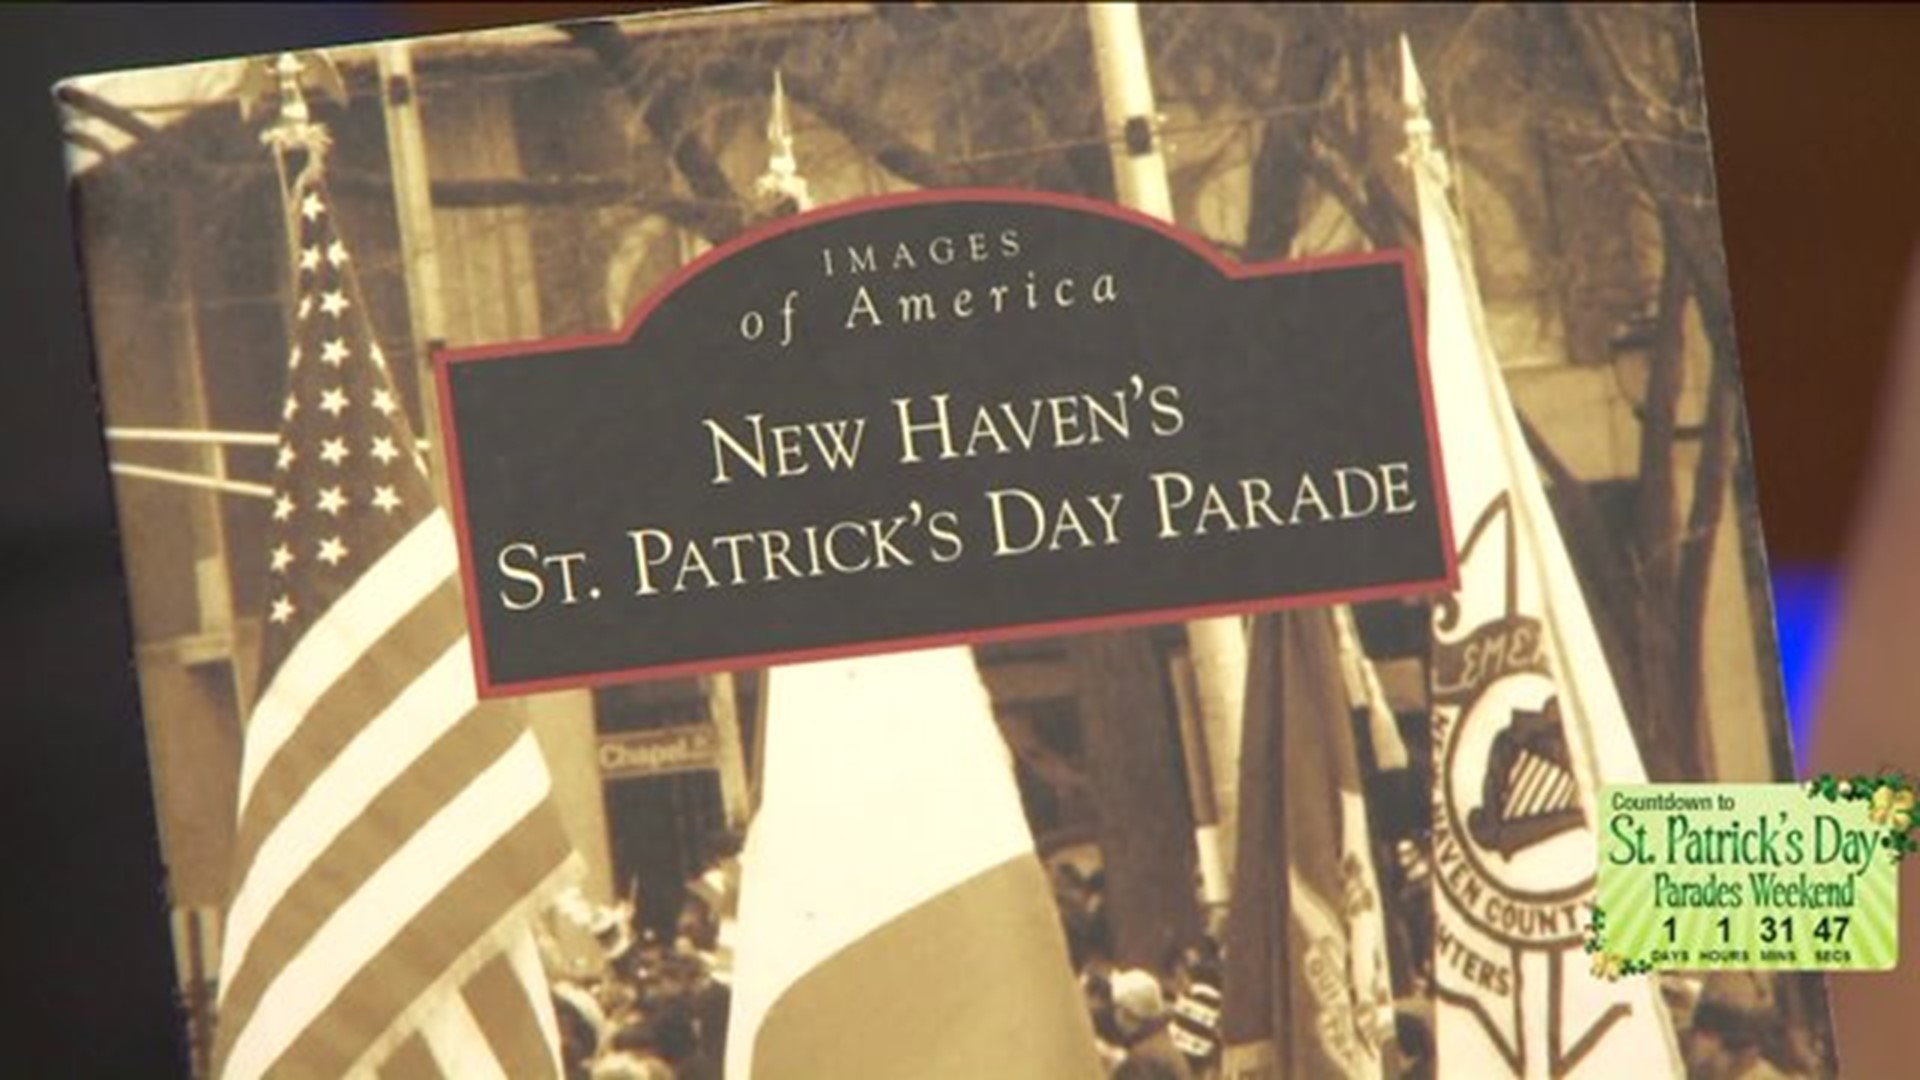 What to expect for the New Haven St. Patrick`s Day Parade